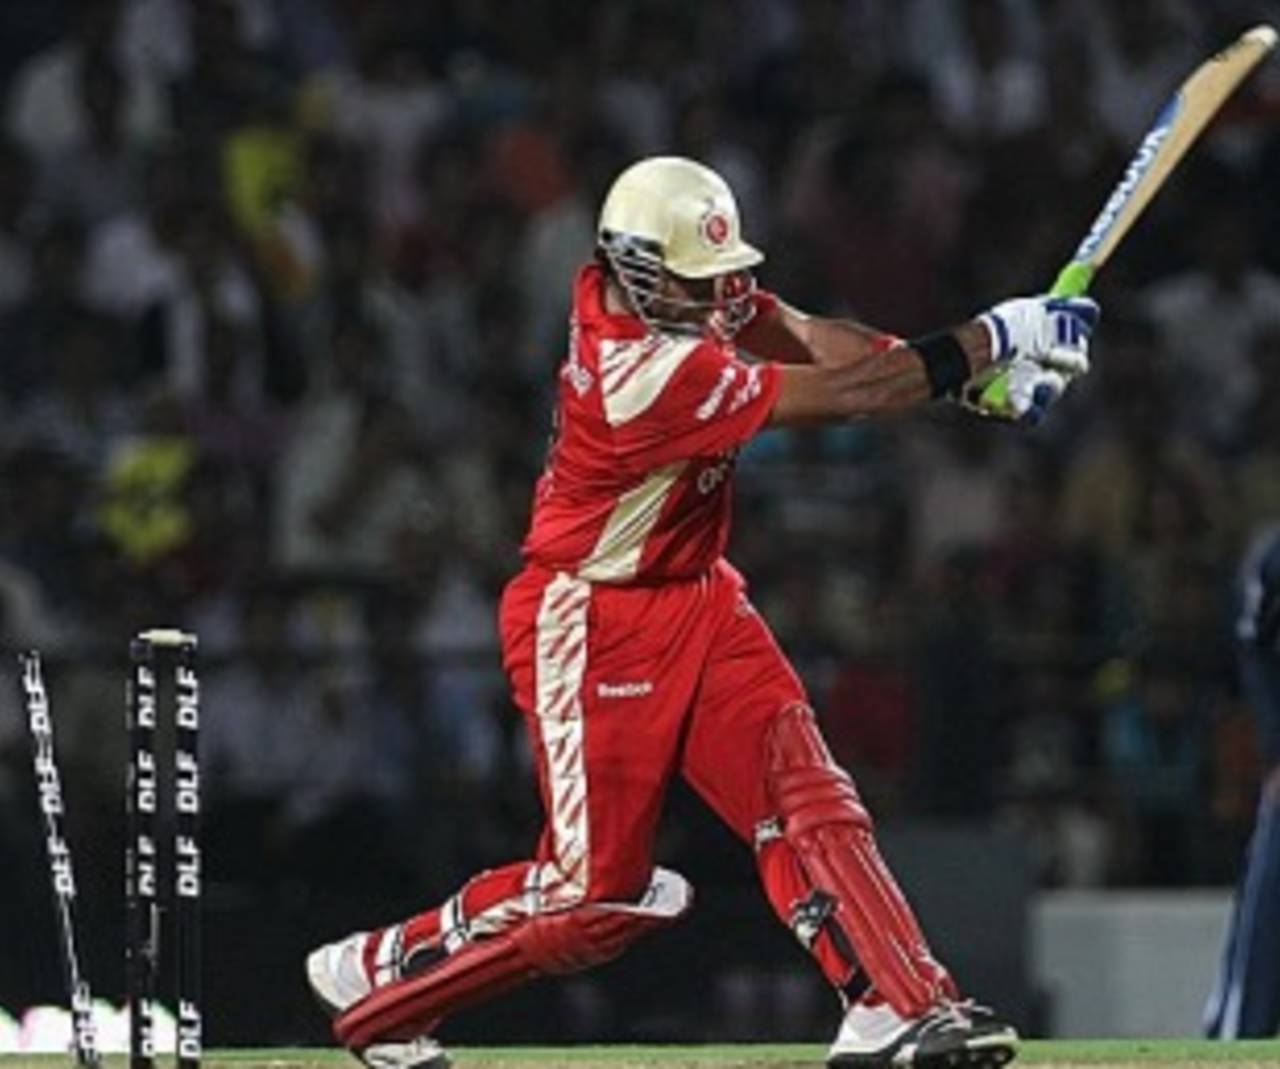 Robin Uthappa is bowled by Harmeet Singh, Deccan Chargers v Royal Challengers Bangalore, IPL, Nagpur, April 12, 2010